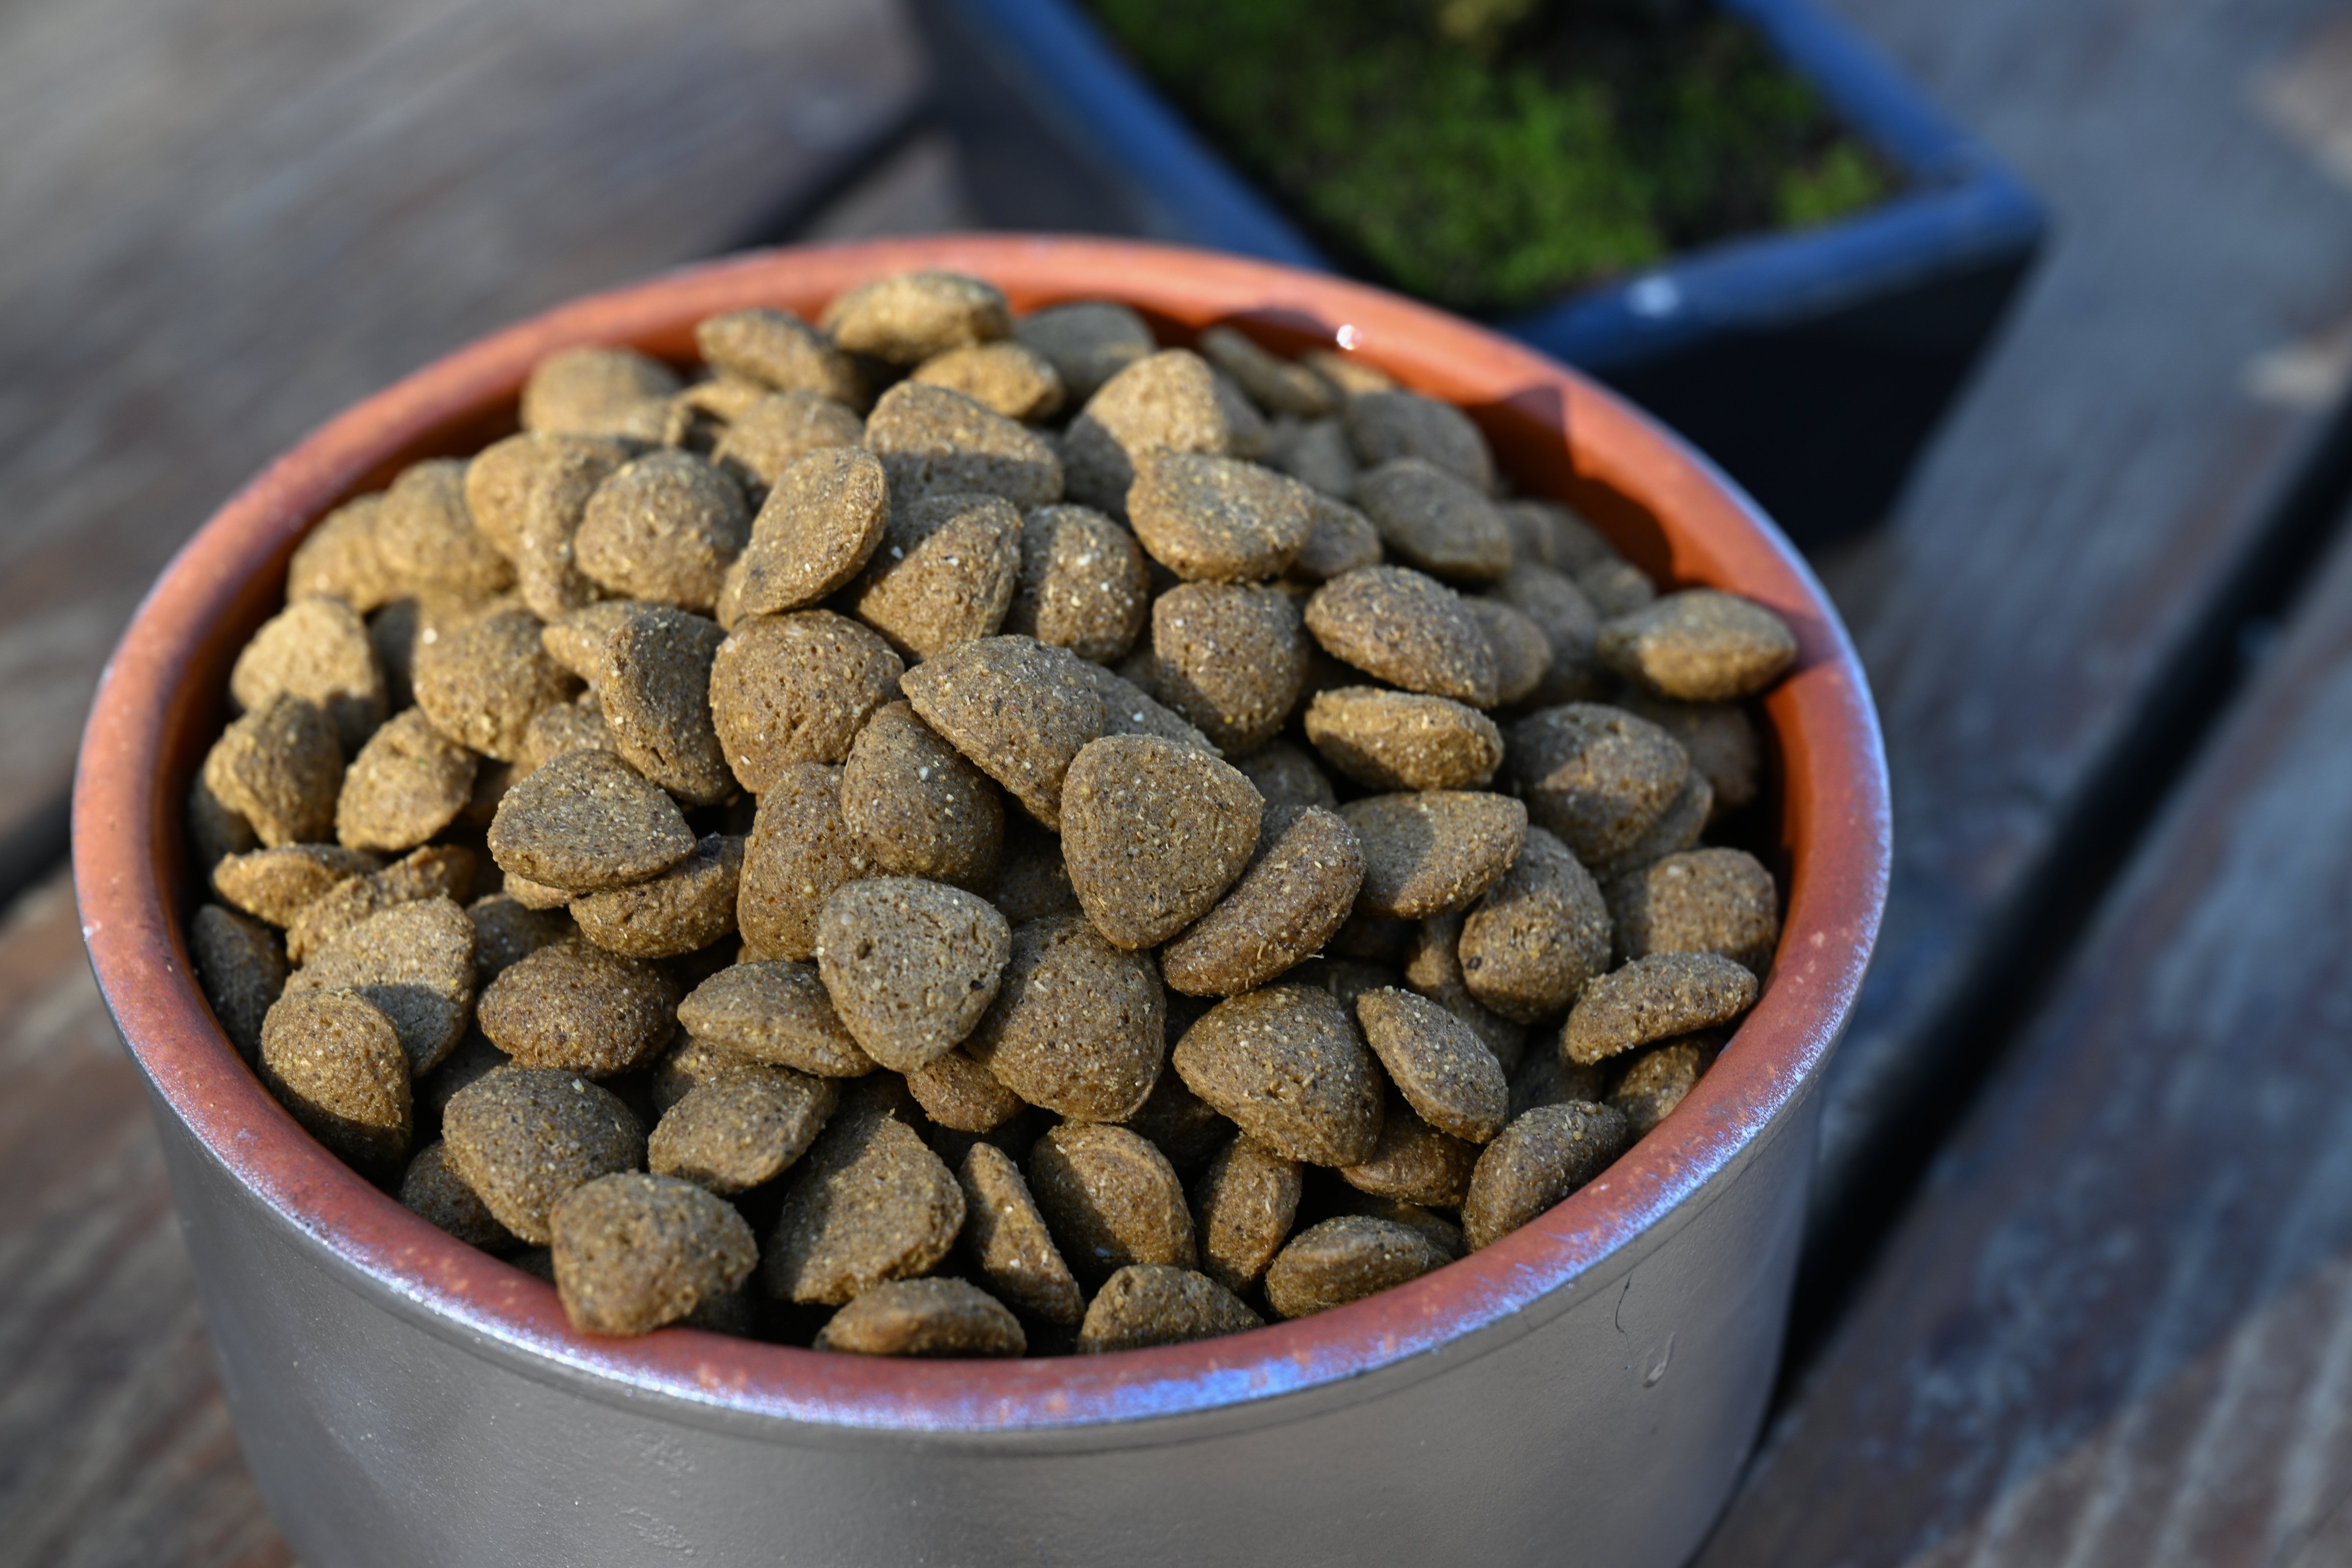 Food for dogs and cats, produced from eco-friendly black soldier flies, in Izmir, Turkiye, on Jan. 21, 2023. (Mehmet Emin Menguarslan—Anadolu Agency/Getty Images)